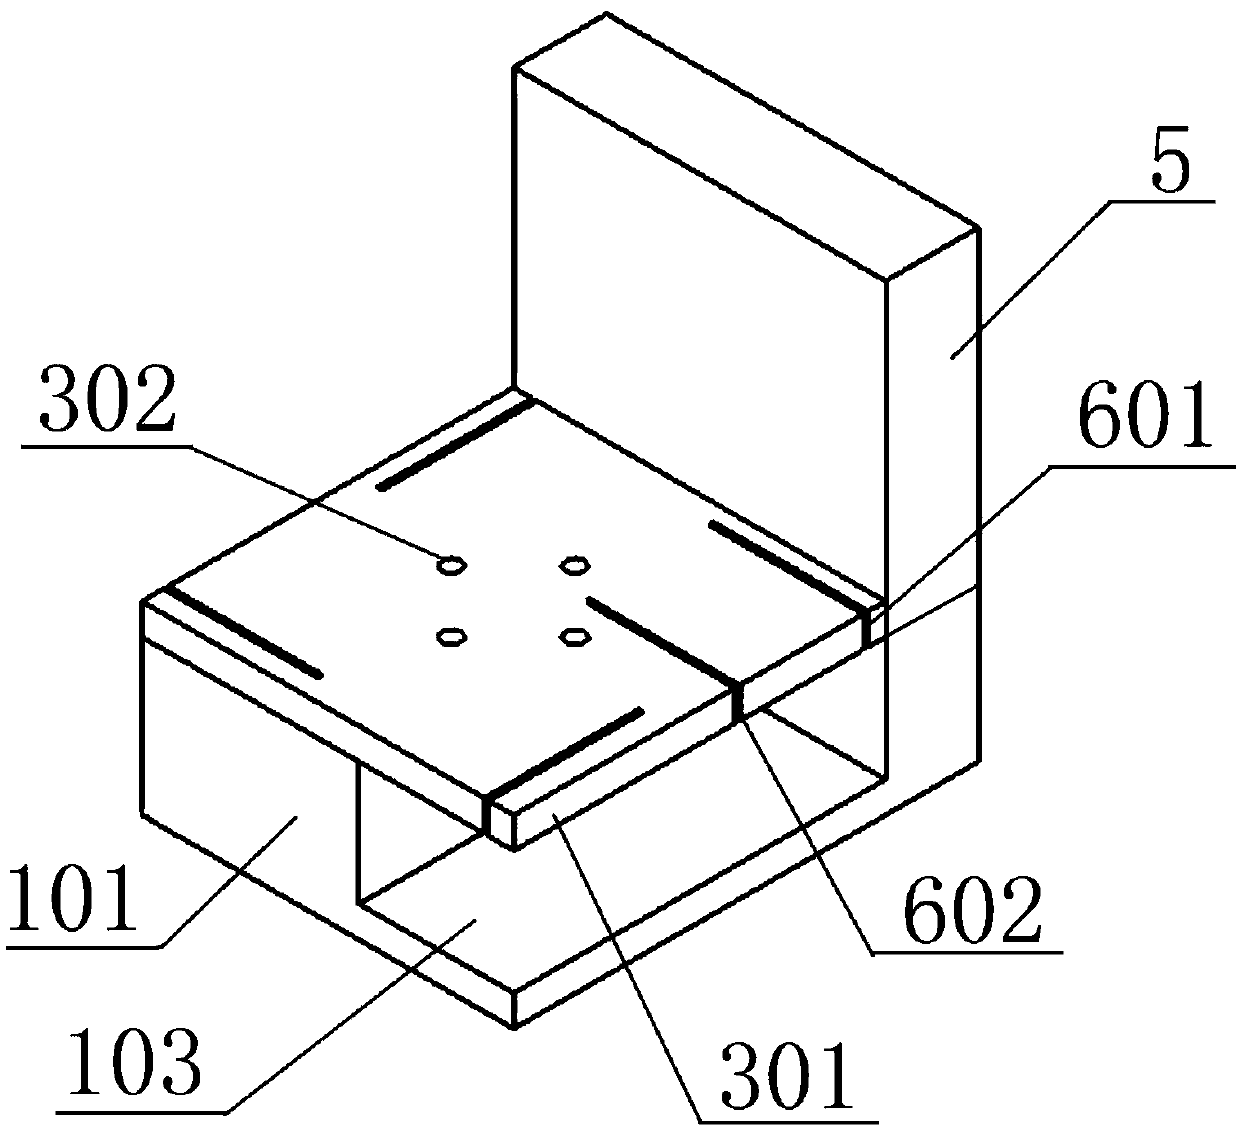 A device and method for making large-section and large-thickness brain tissue slices